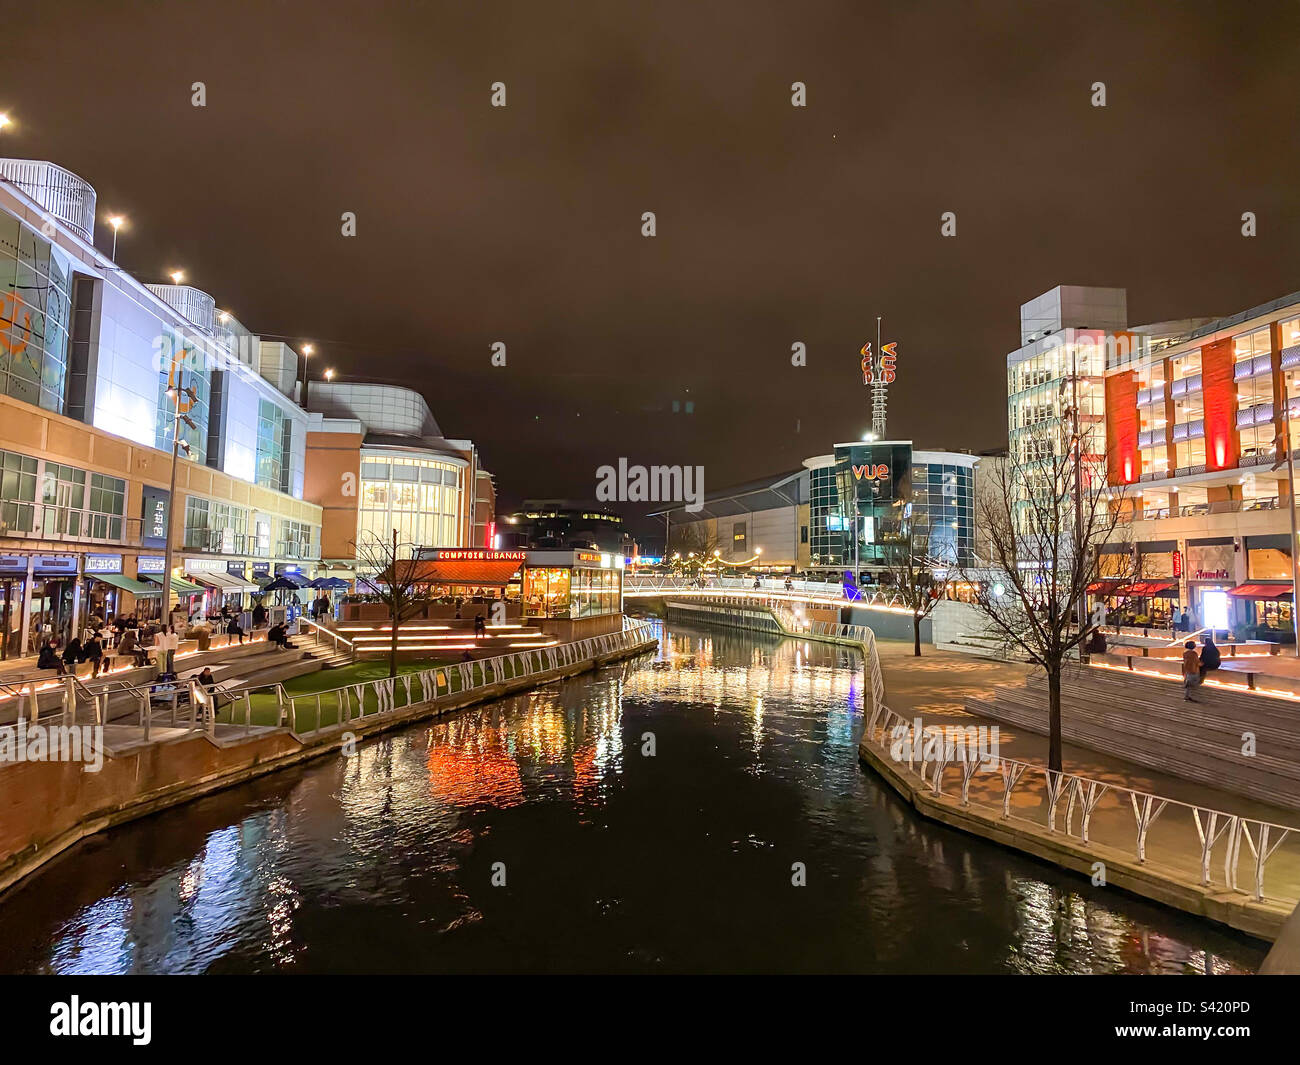 A view of shops and restaurants with bright lights at The Riverside part of The Oracle Centre in Reading, UK at night Stock Photo